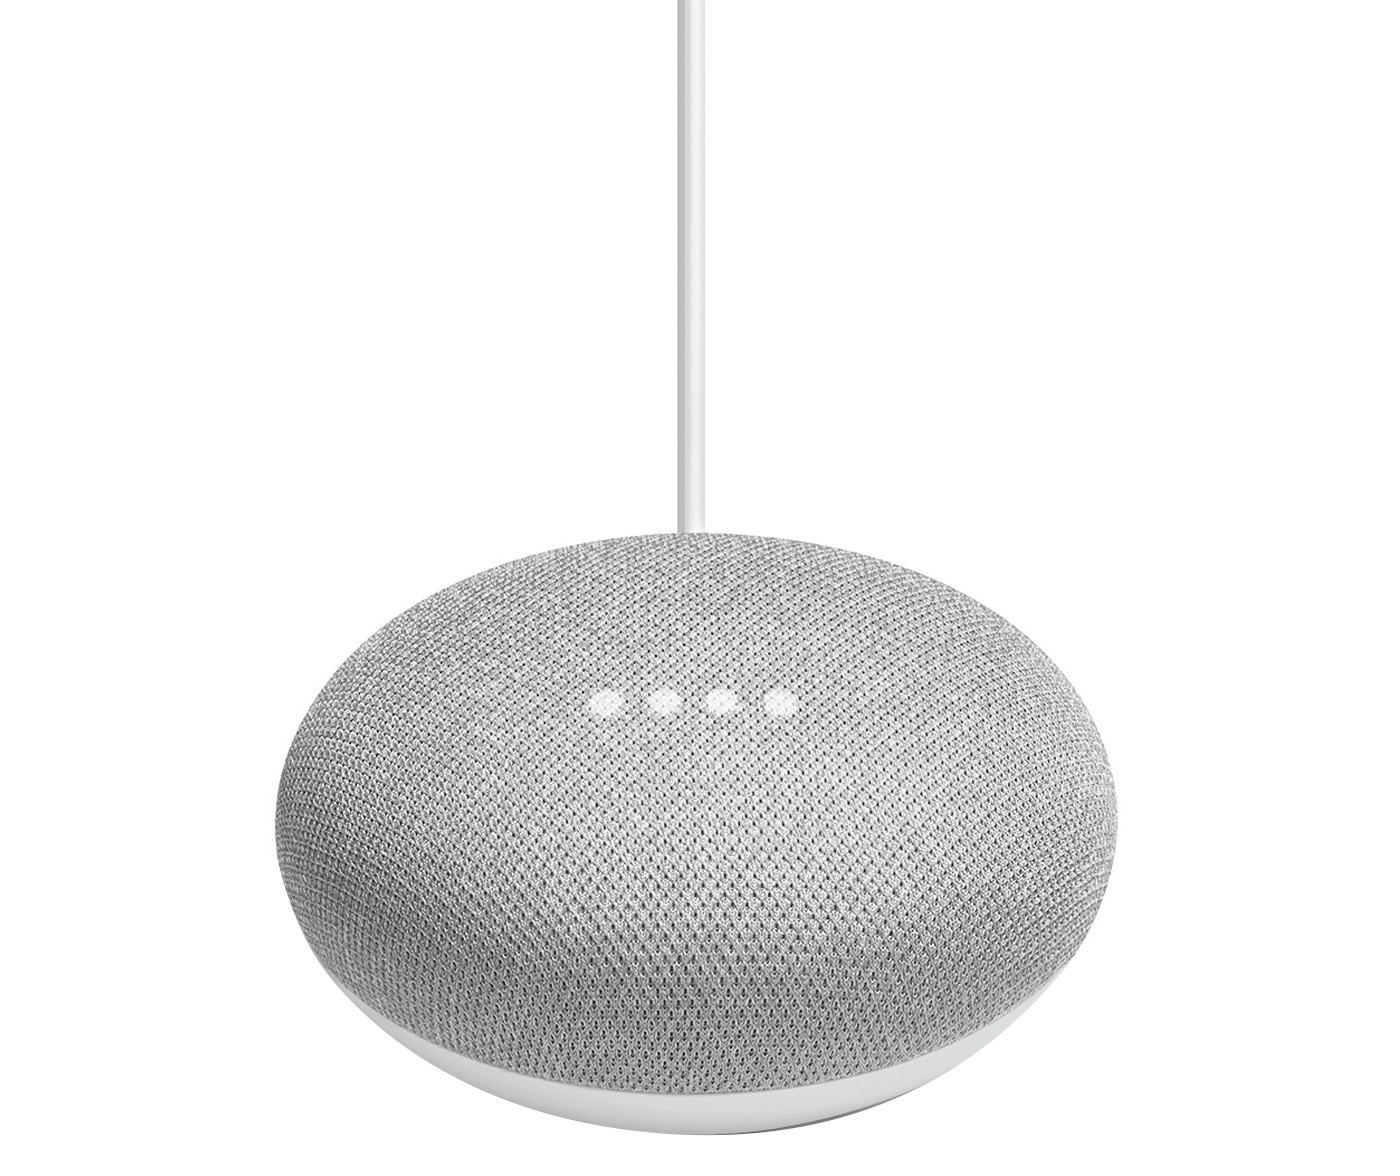 Google Home Mini - Smart Speaker with Google Assistant - image 1 of 6